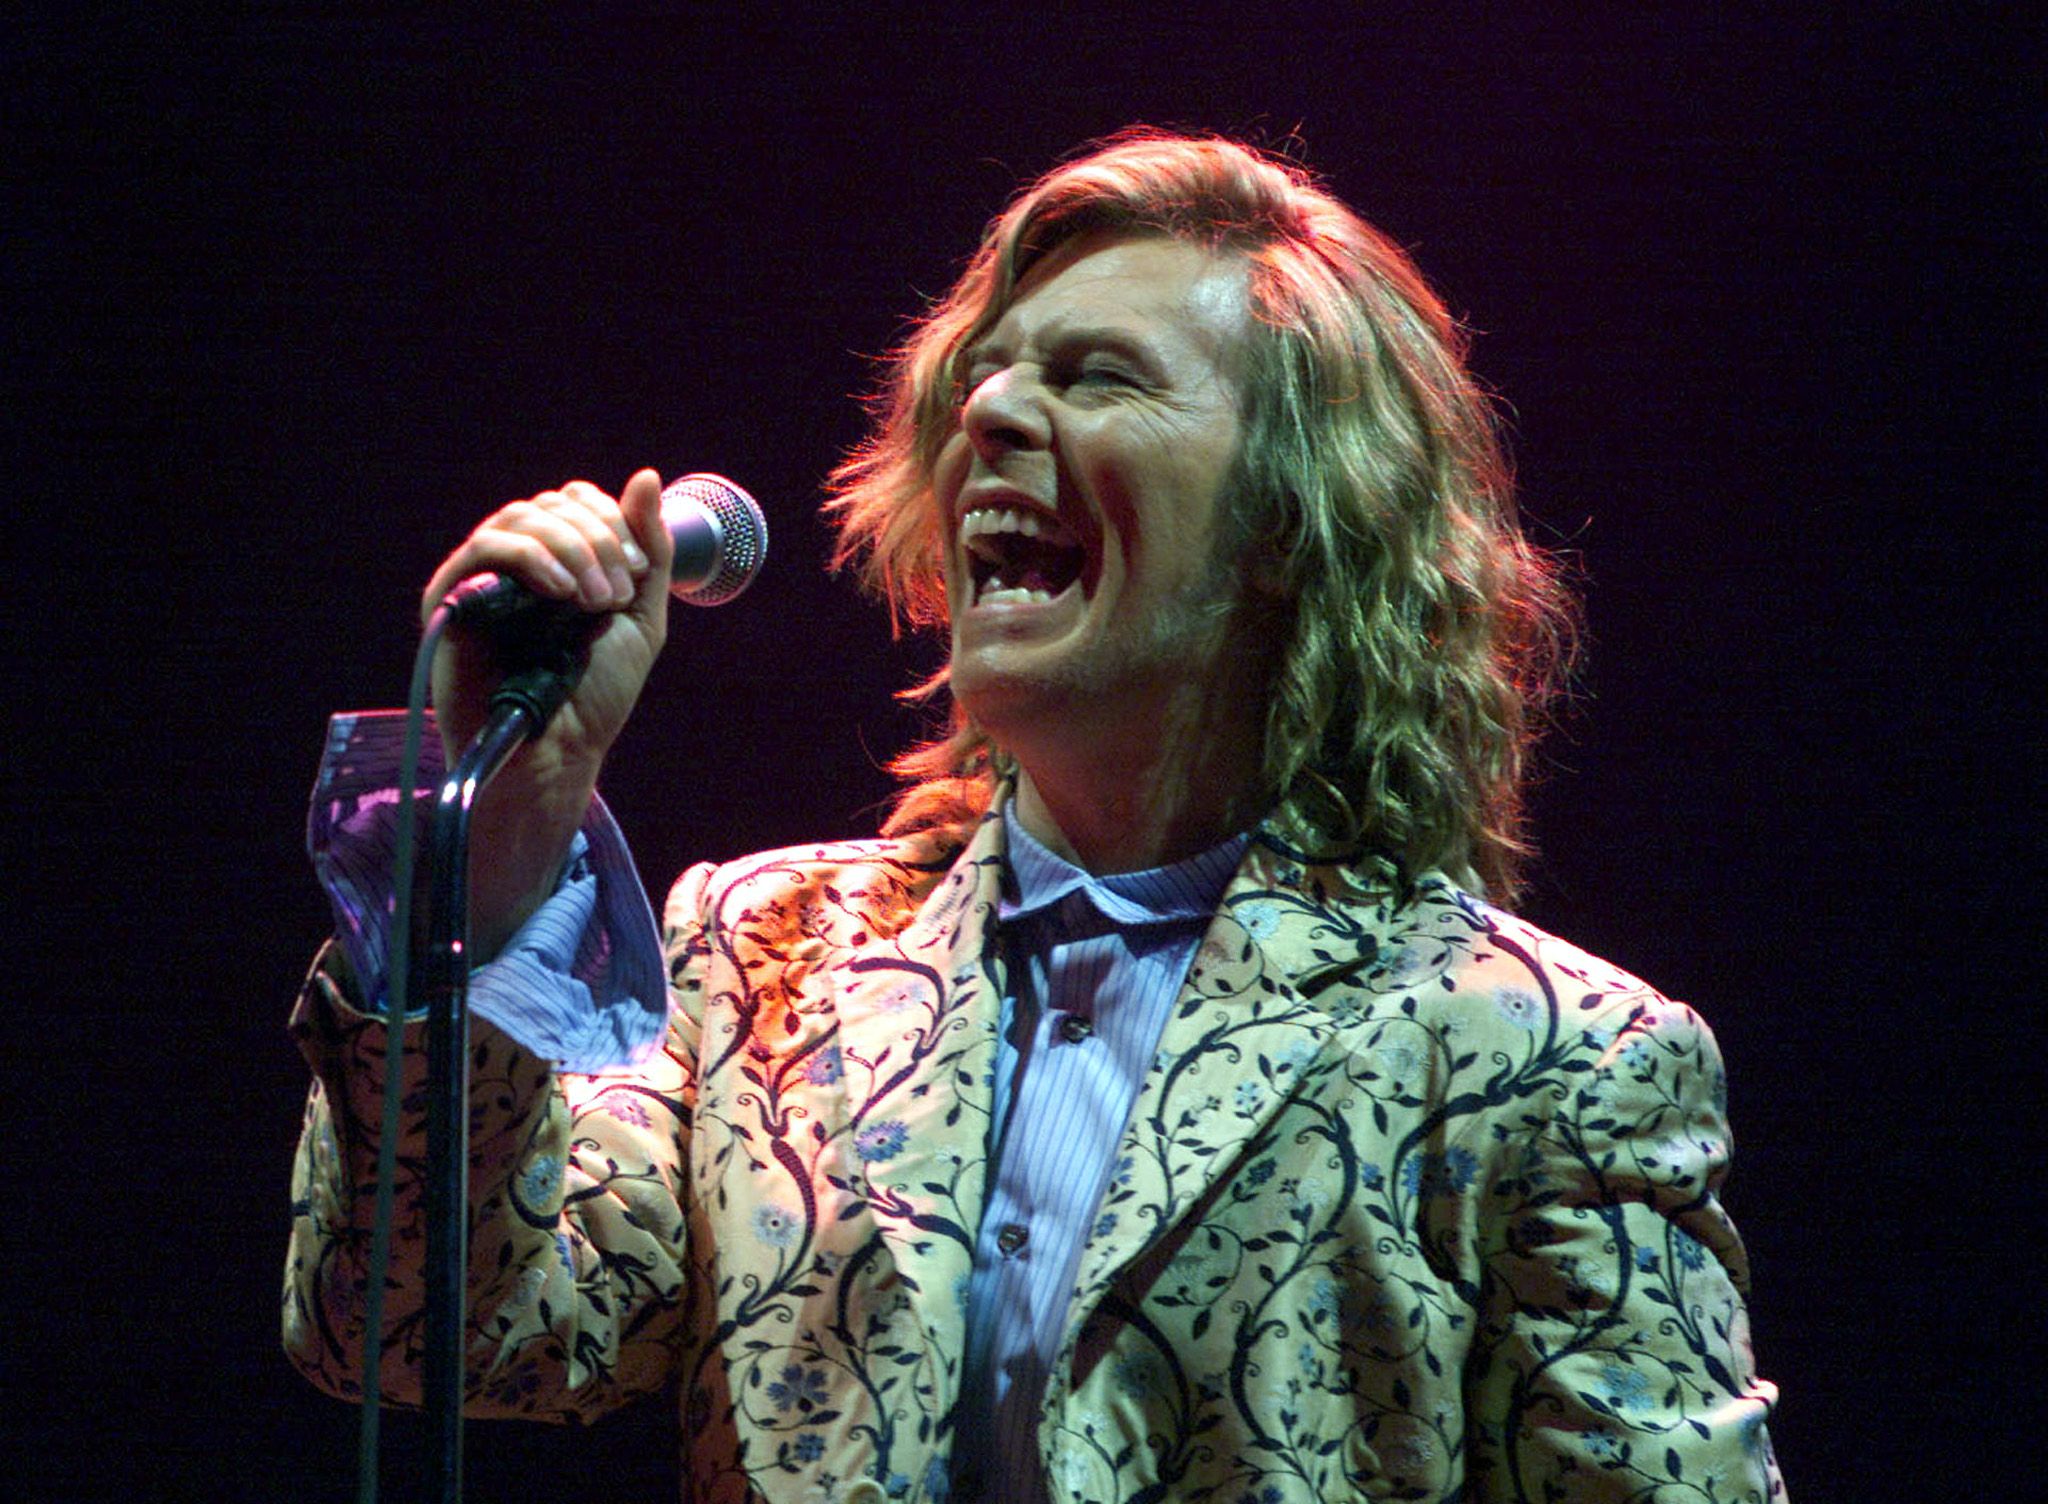 Rock star David Bowie, shown performing at the Glastonbury Festival